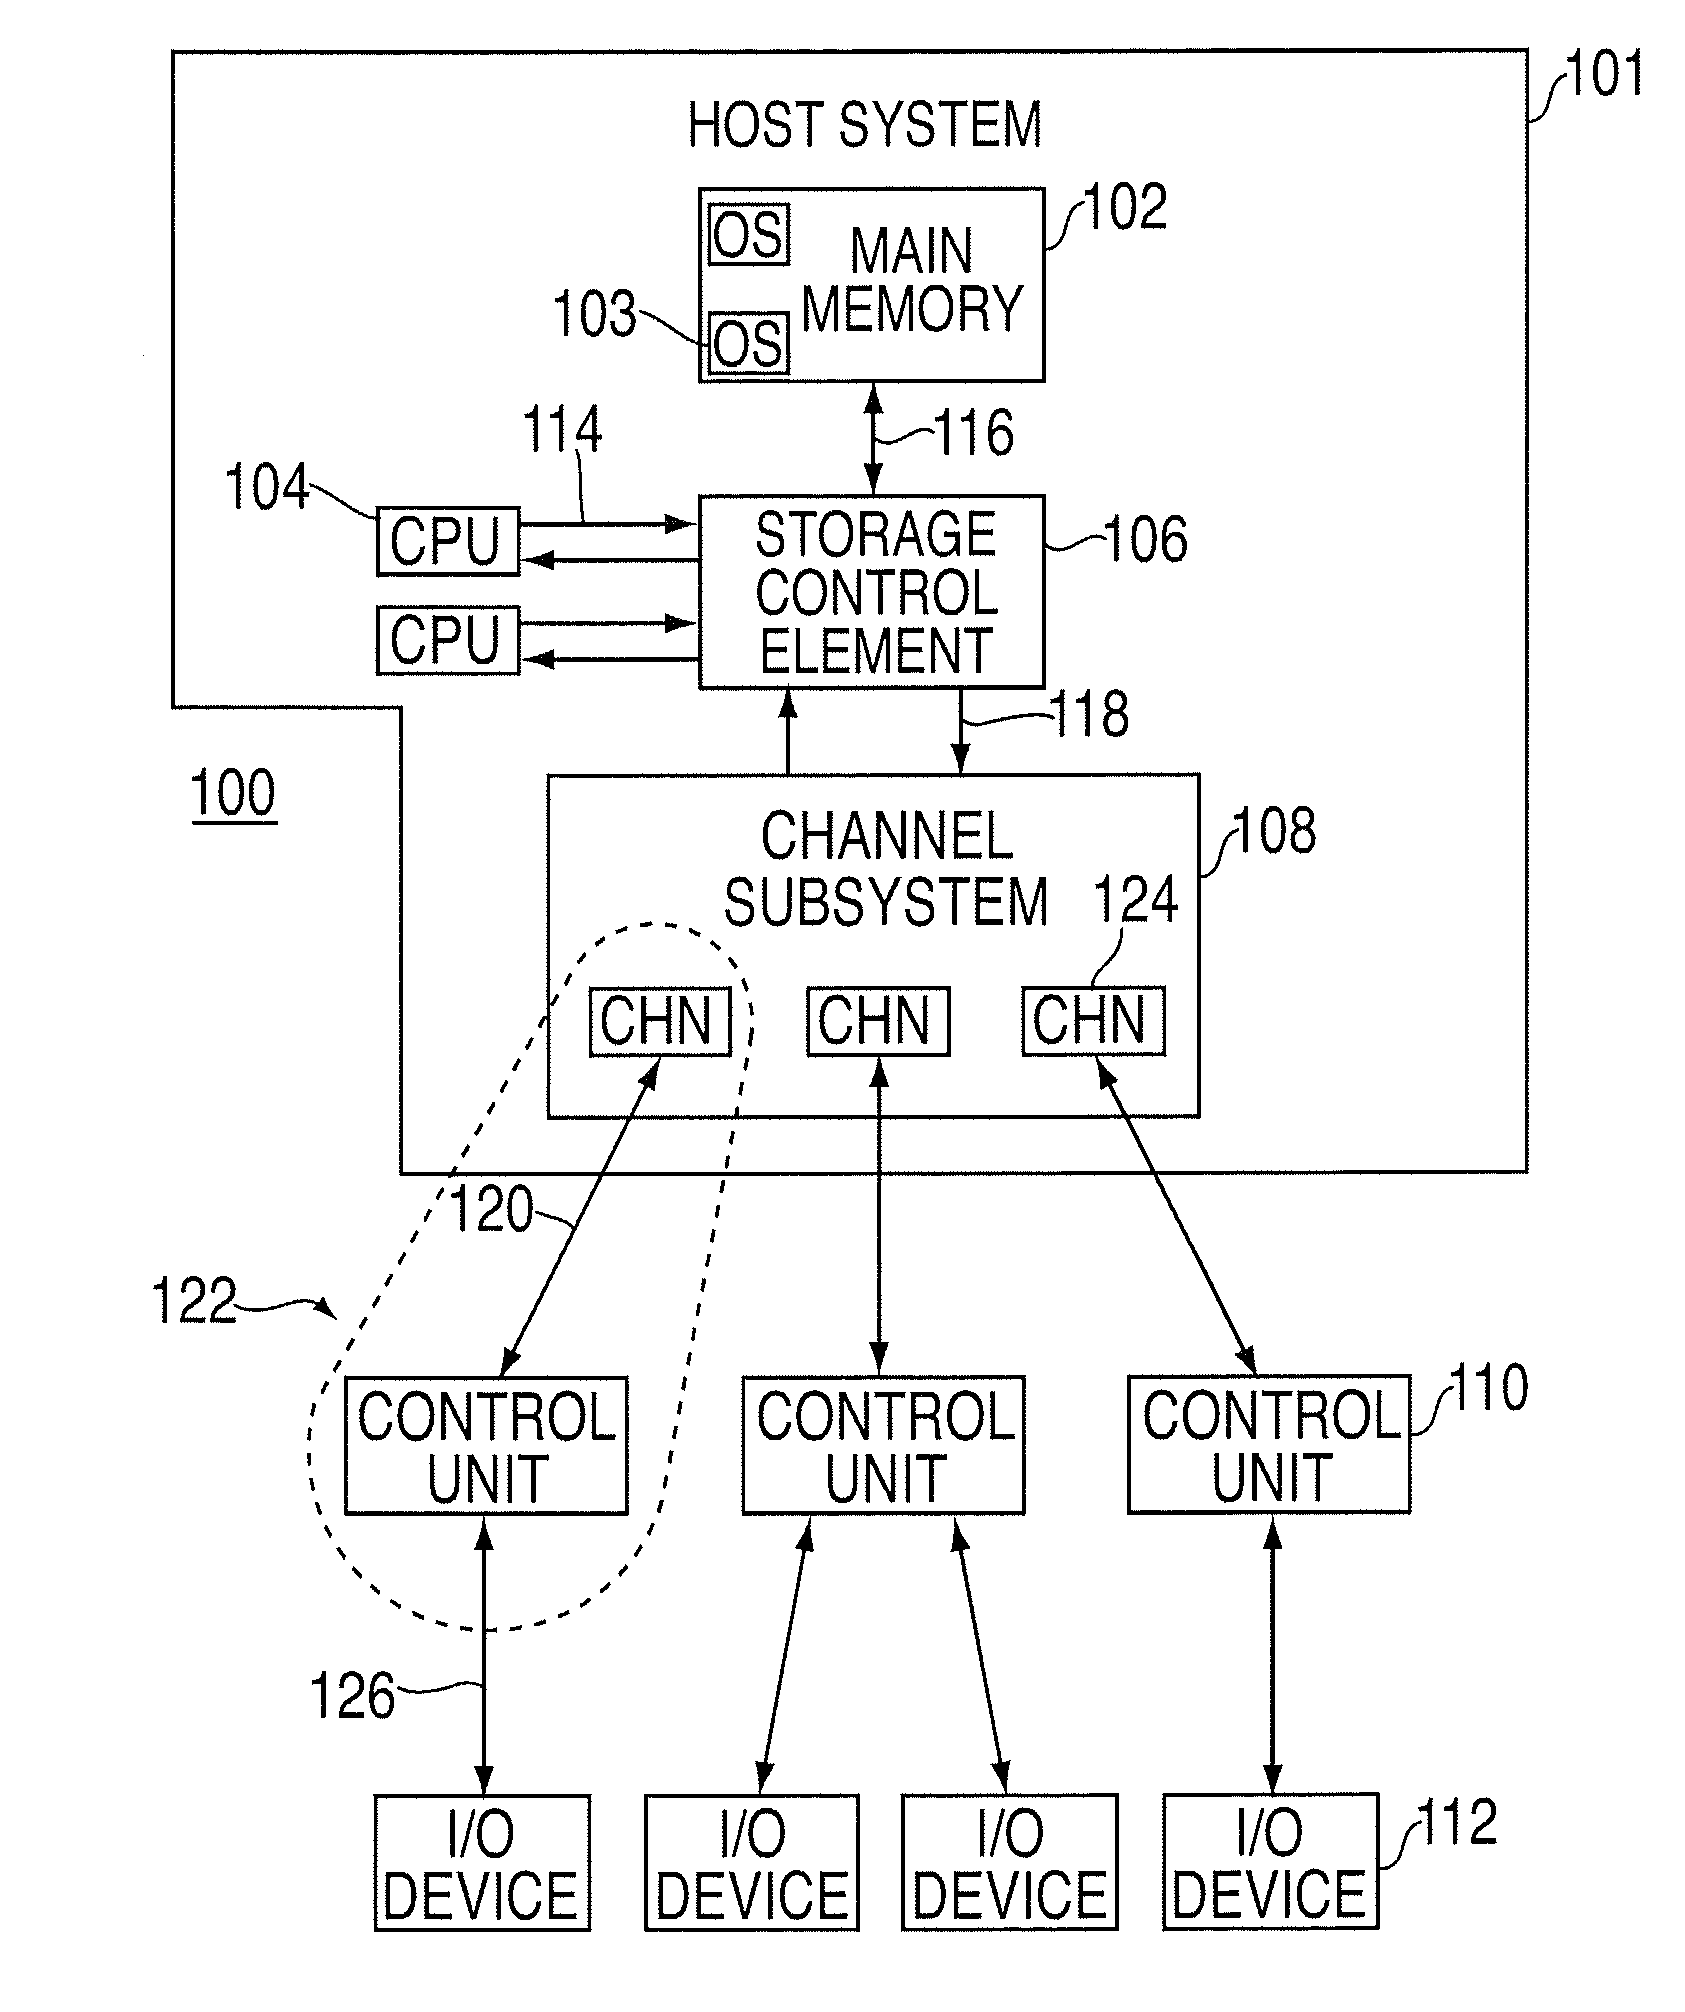 Processing communication data in a ships passing condition